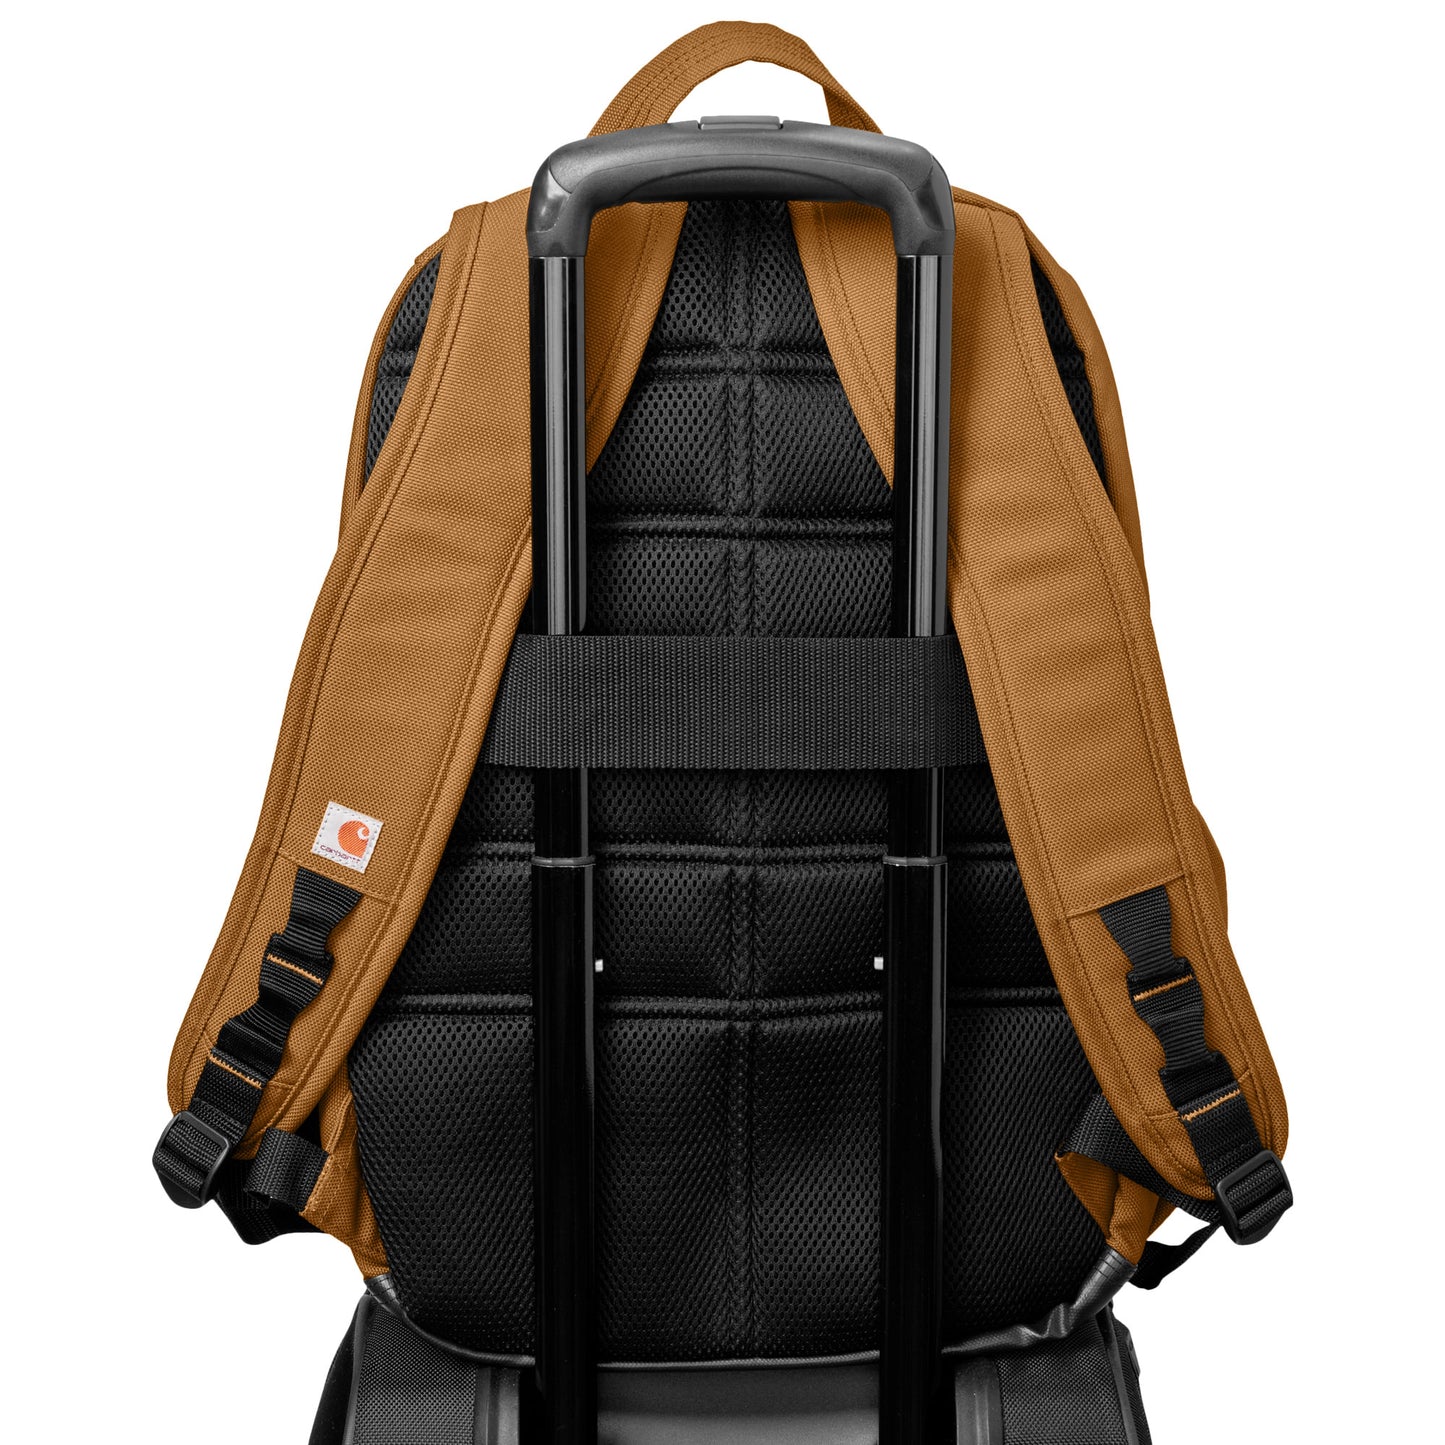 Carhartt 28L Foundry Series Dual-Compartment Backpack